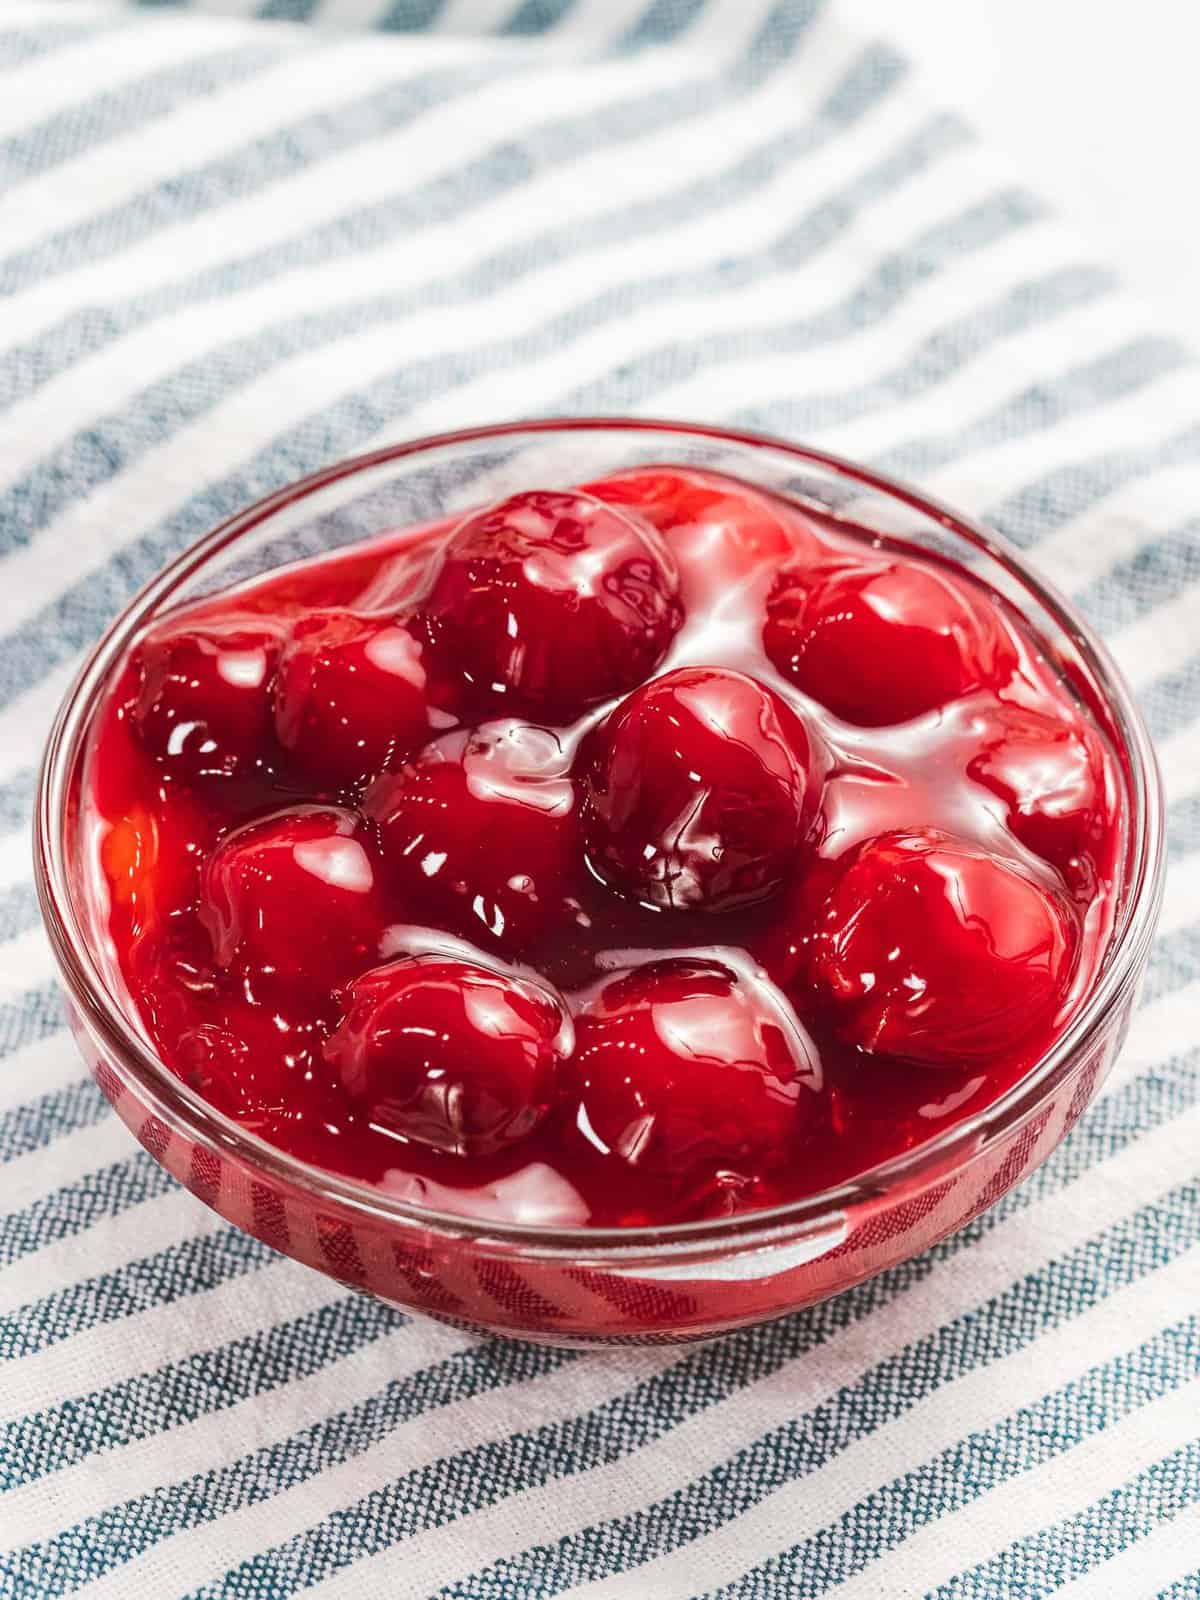 Cherry pie filling with bright red cherries in a bowl.